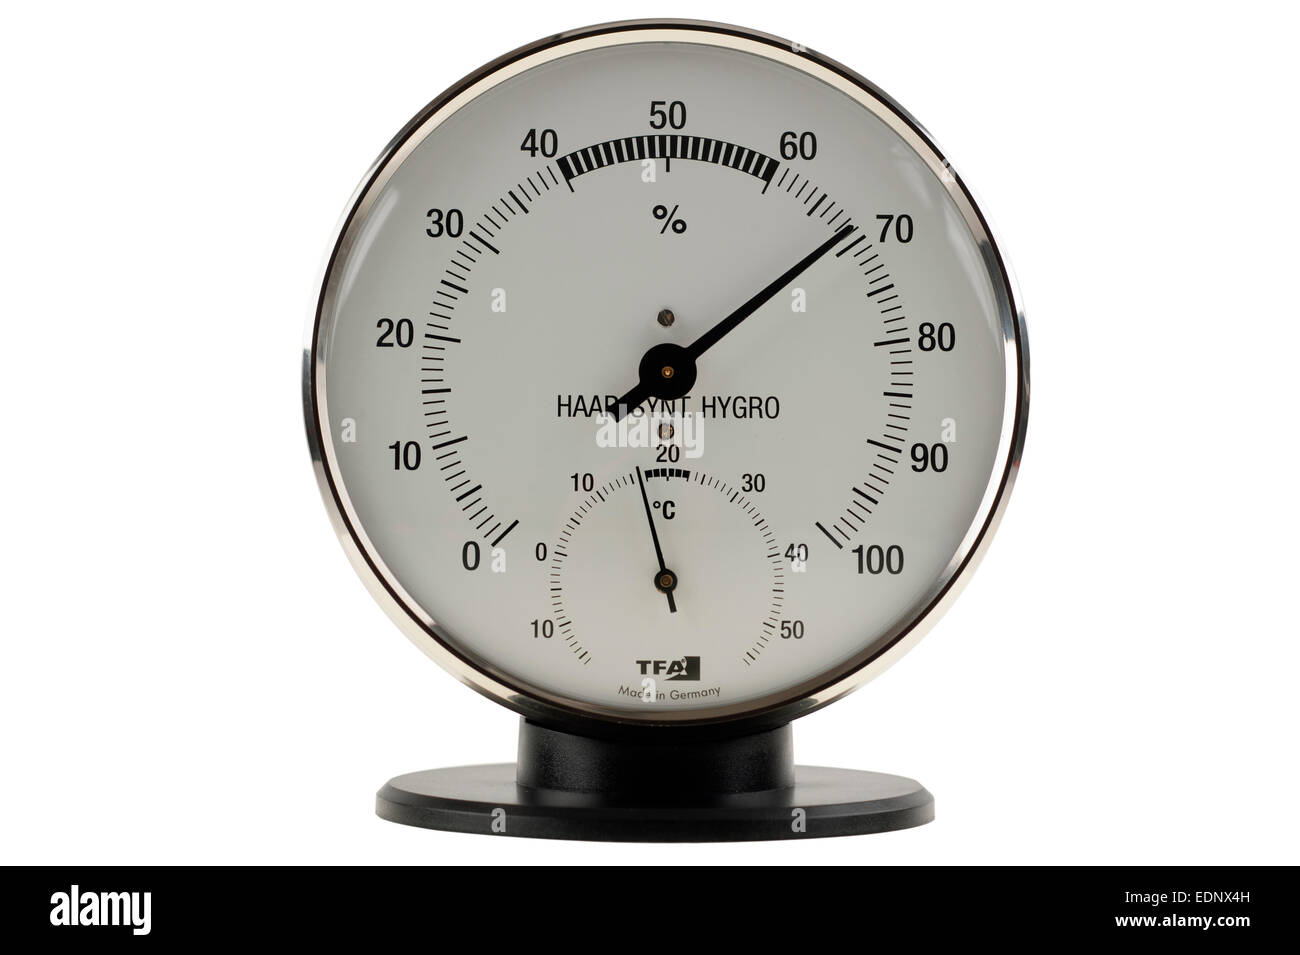 High humidity shown on a hygrometer dial Stock Photo